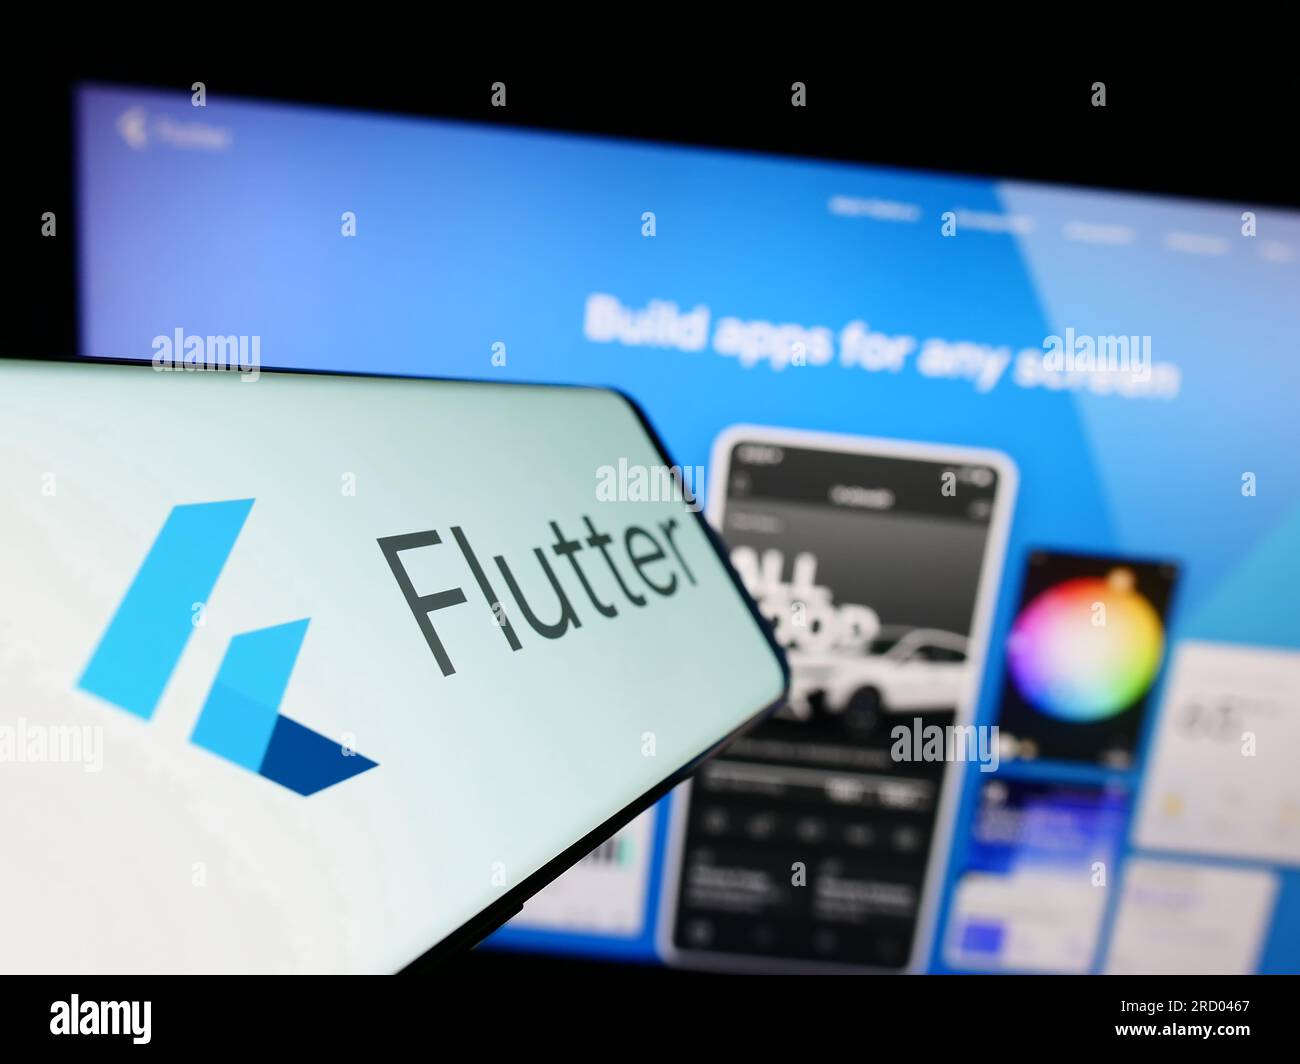 Mobile phone with logo of UI software development kit Flutter (Google) on screen in front of website. Focus on center-left of phone display. Stock Photo